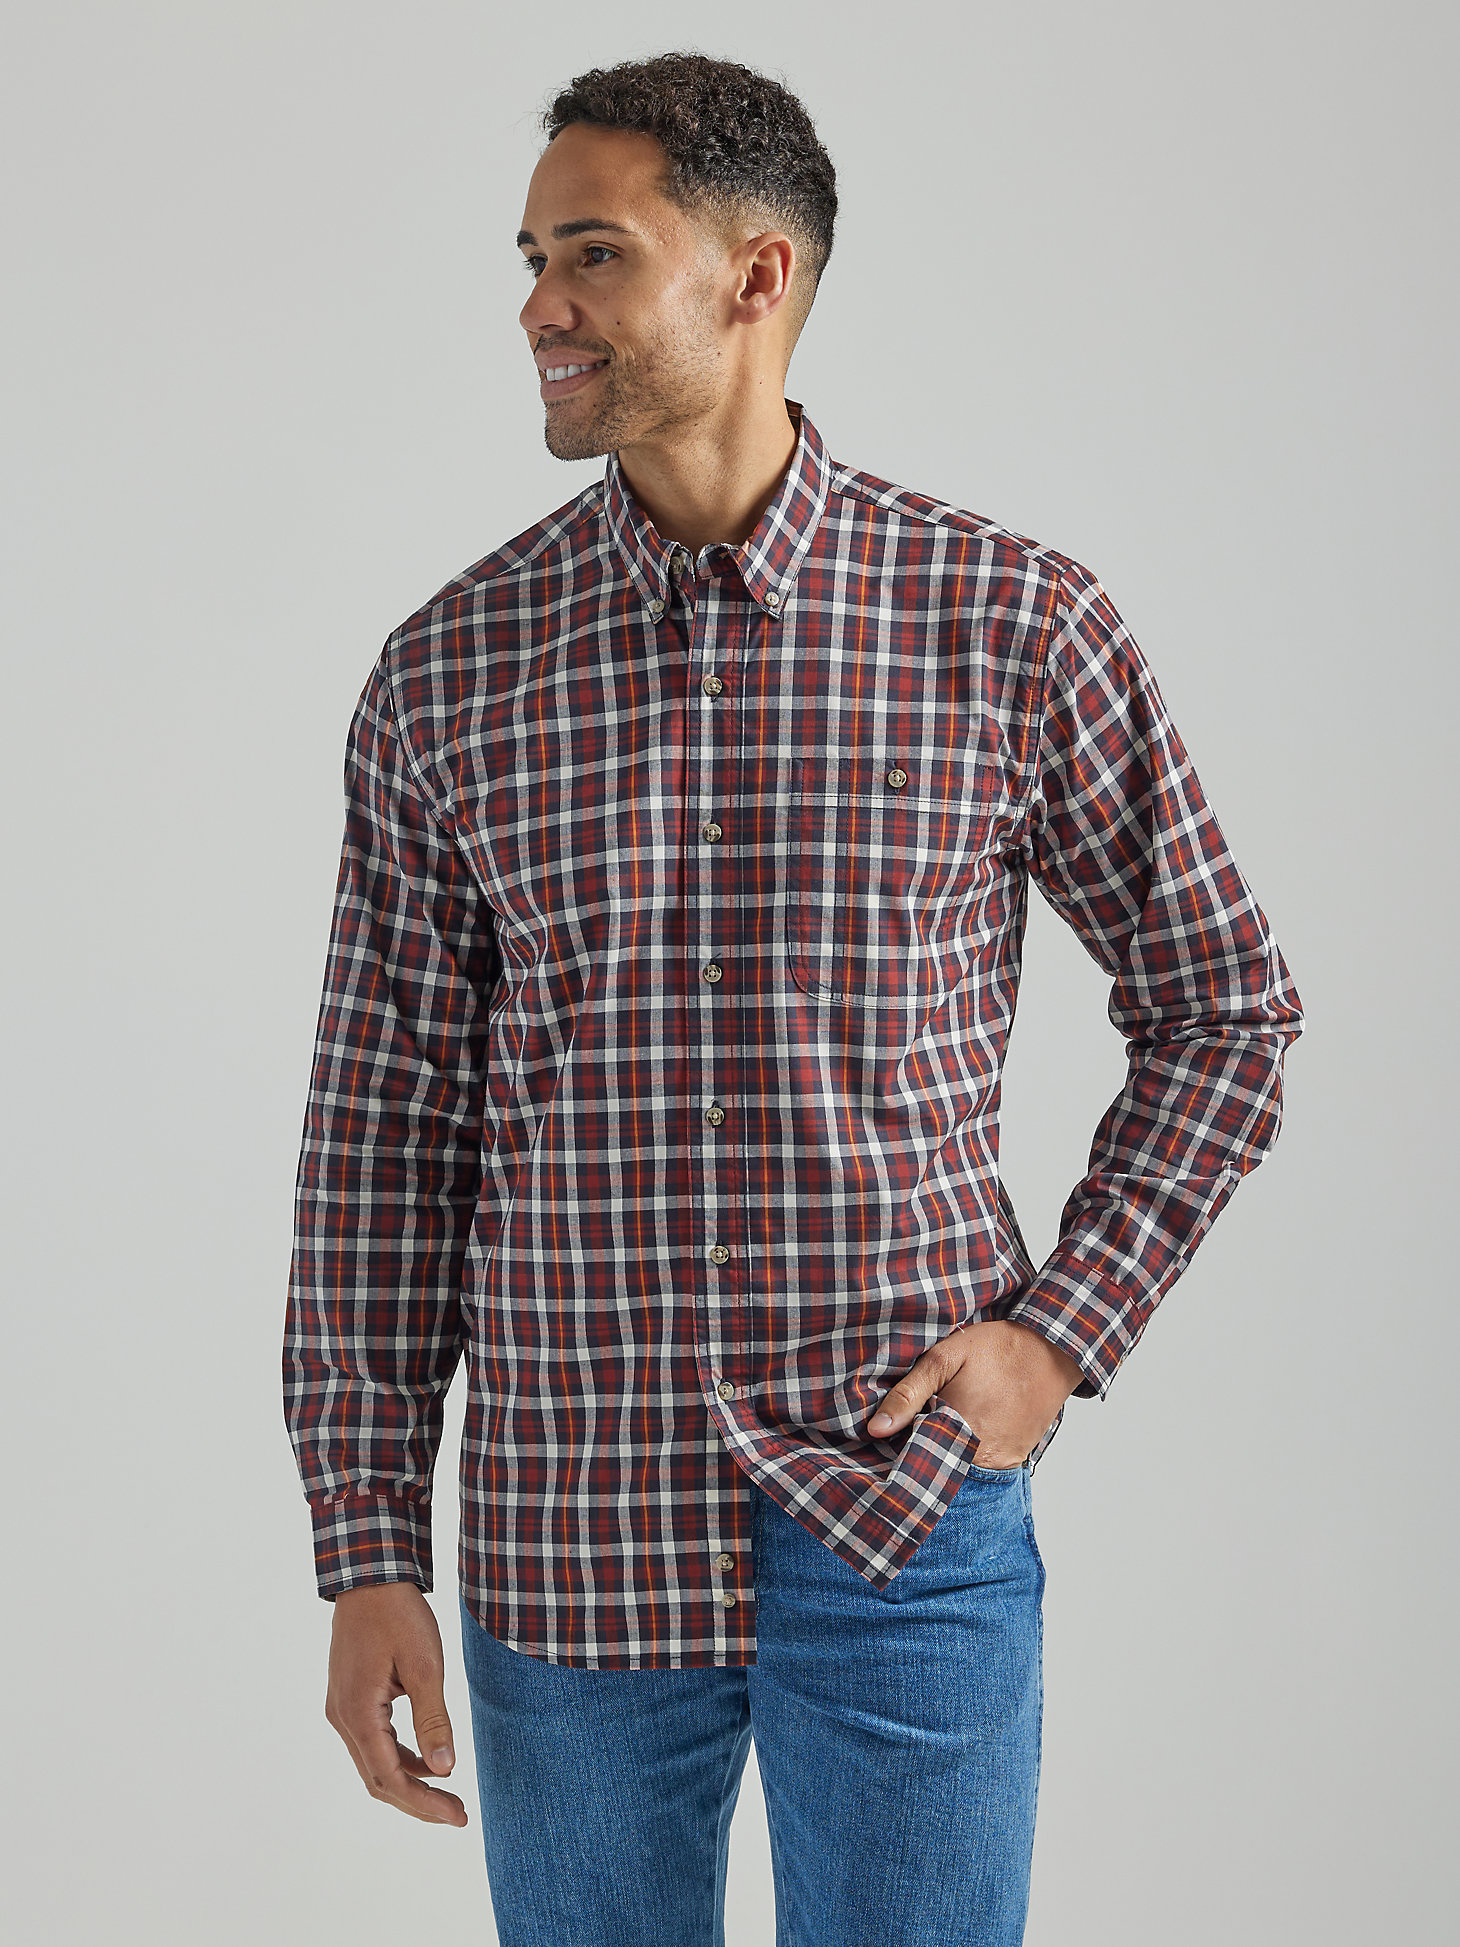 Wrangler Rugged Wear® Long Sleeve Wrinkle Resist Plaid Button-Down Shirt in Houston main view